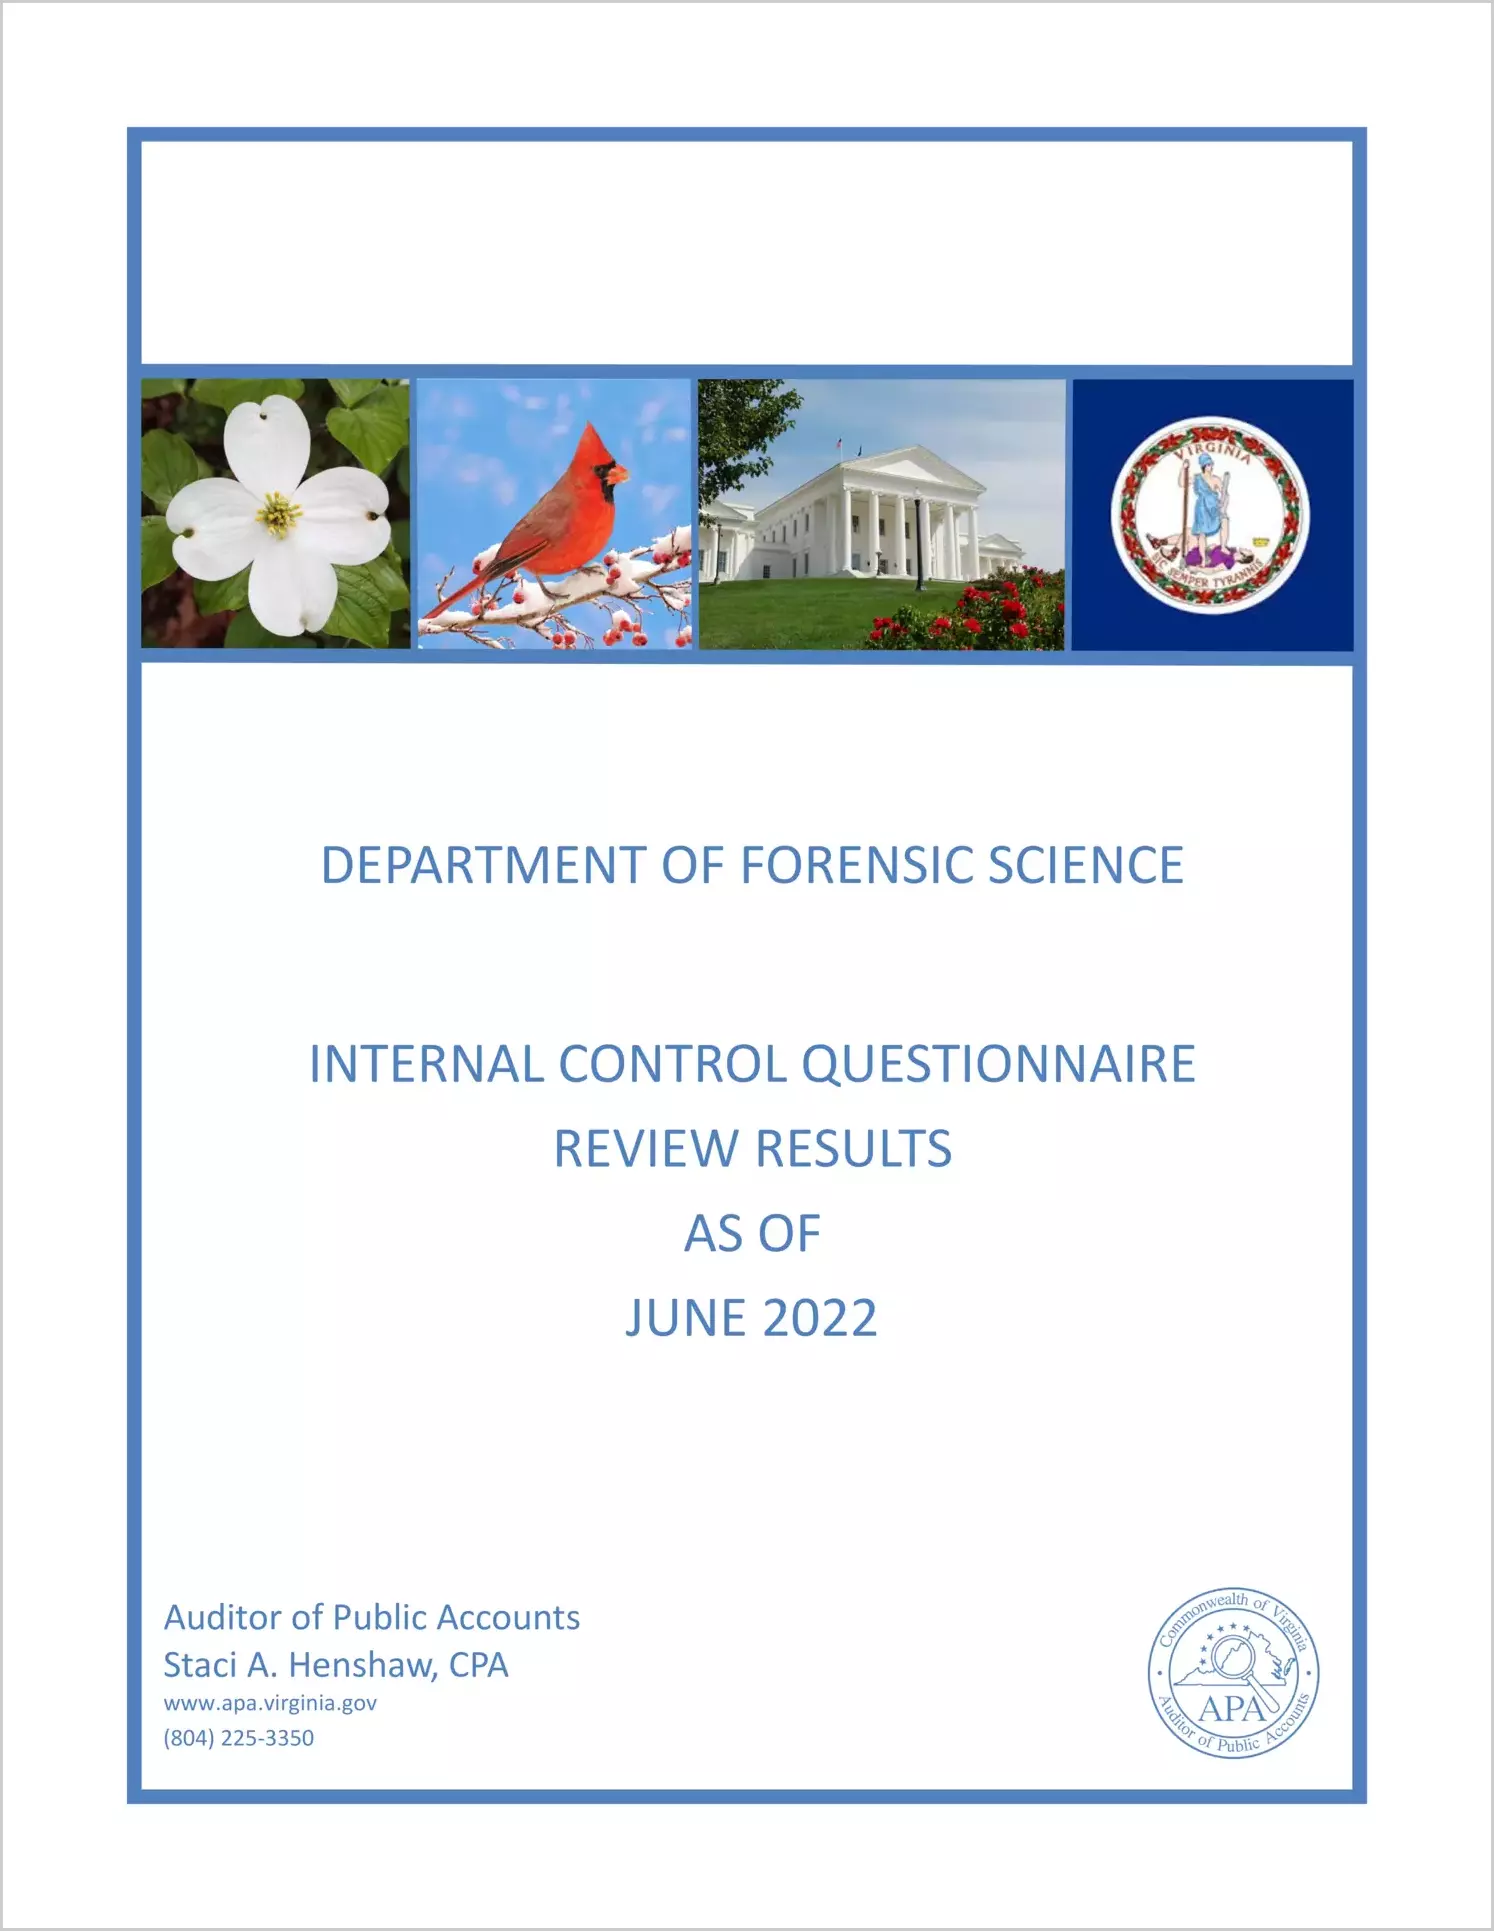 Department of Forensic Science Internal Control Questionnaire Review Results as of June 2022